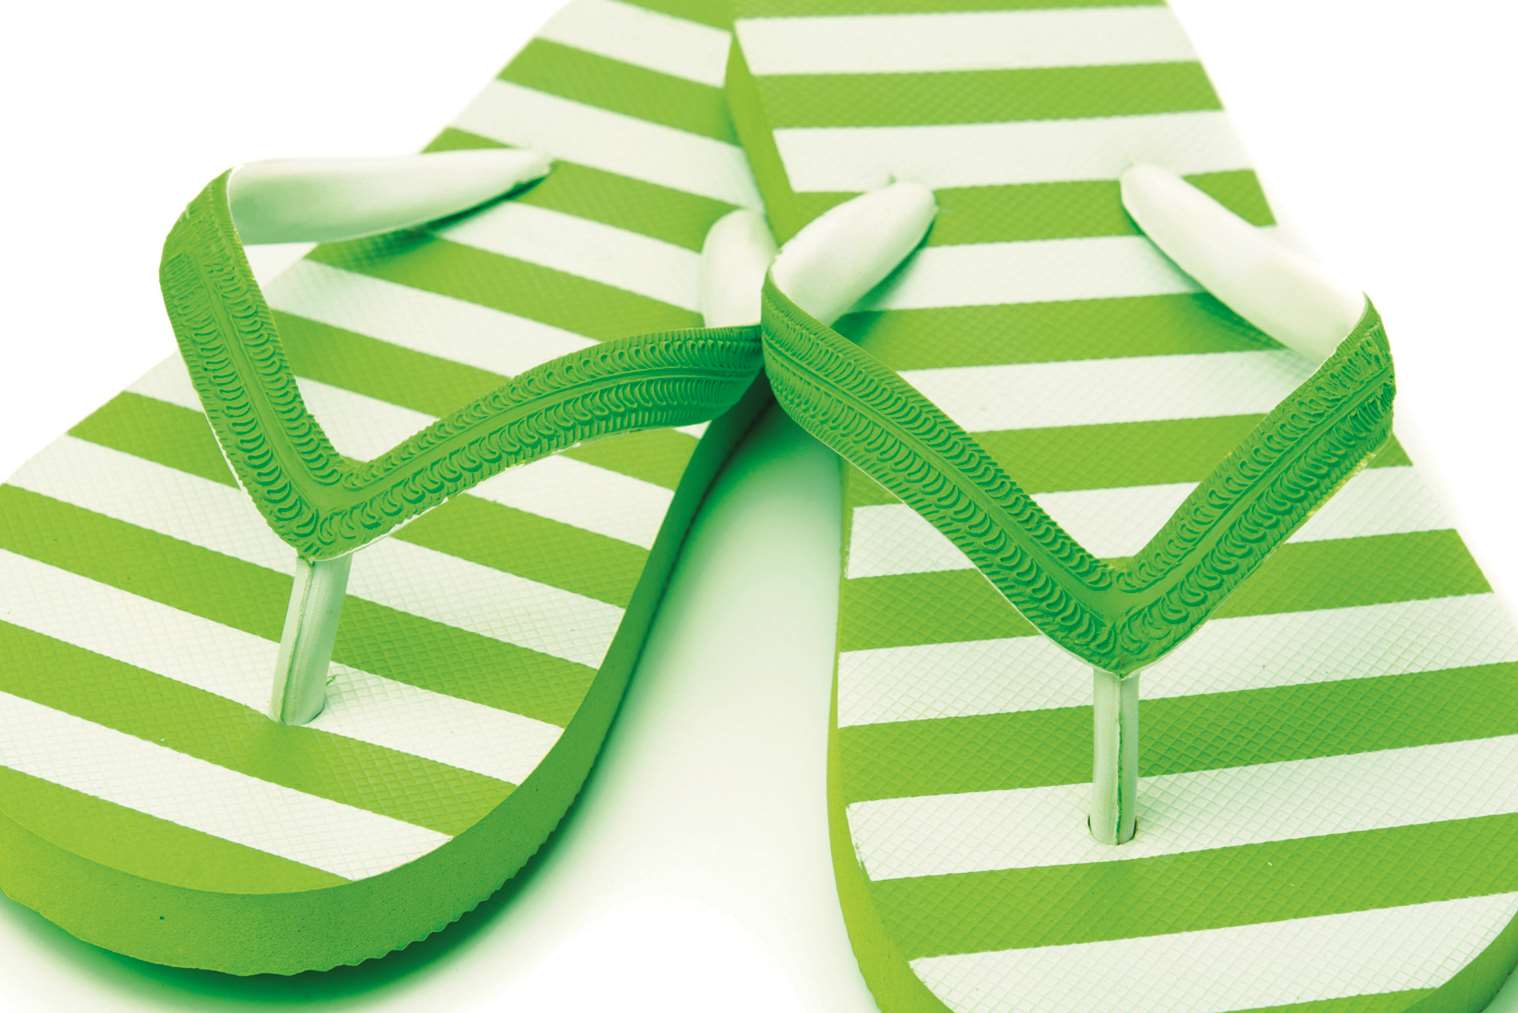 Flip flops are handed out by Street Pastor teams to anyone caught walking barefoot on a night out.